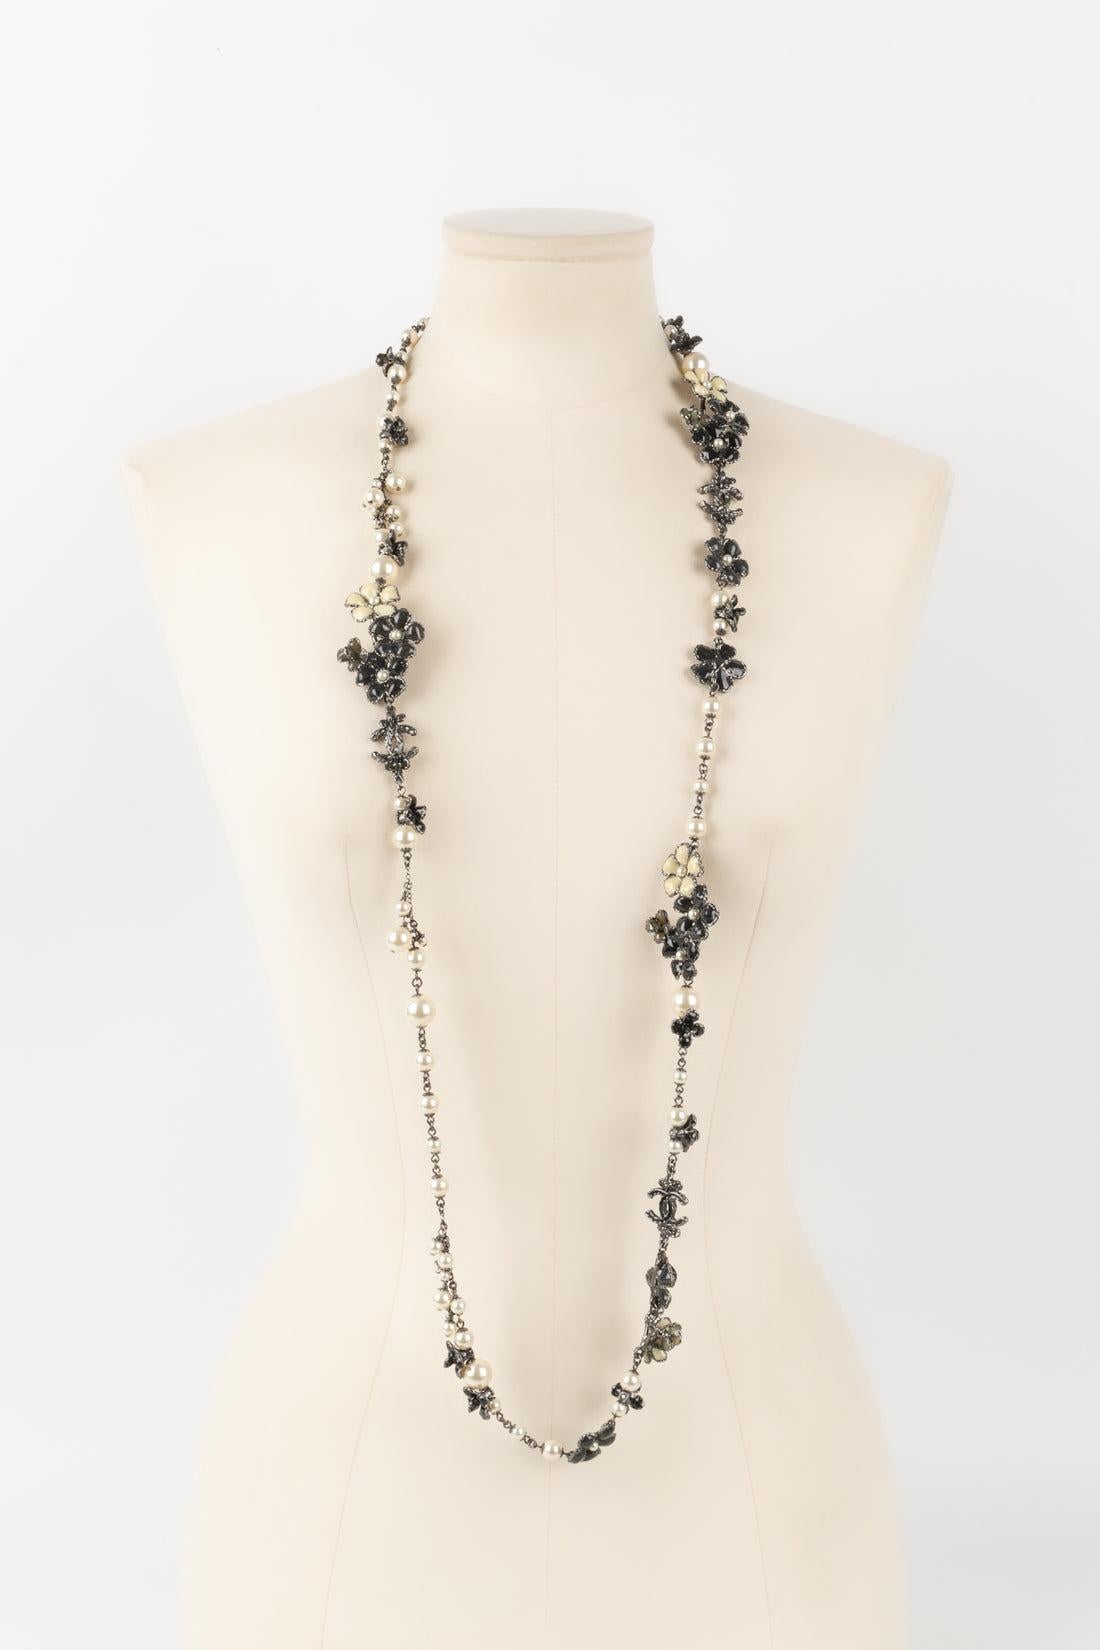 Chanel - (Made in France) Silvery metal necklace with costume pearls and resin. 2012 Collection. To be mentioned, a petal is broken.

Additional information:
Condition: Good condition
Dimensions: Length: from 114 cm to 116.5 cm
Period: 21st